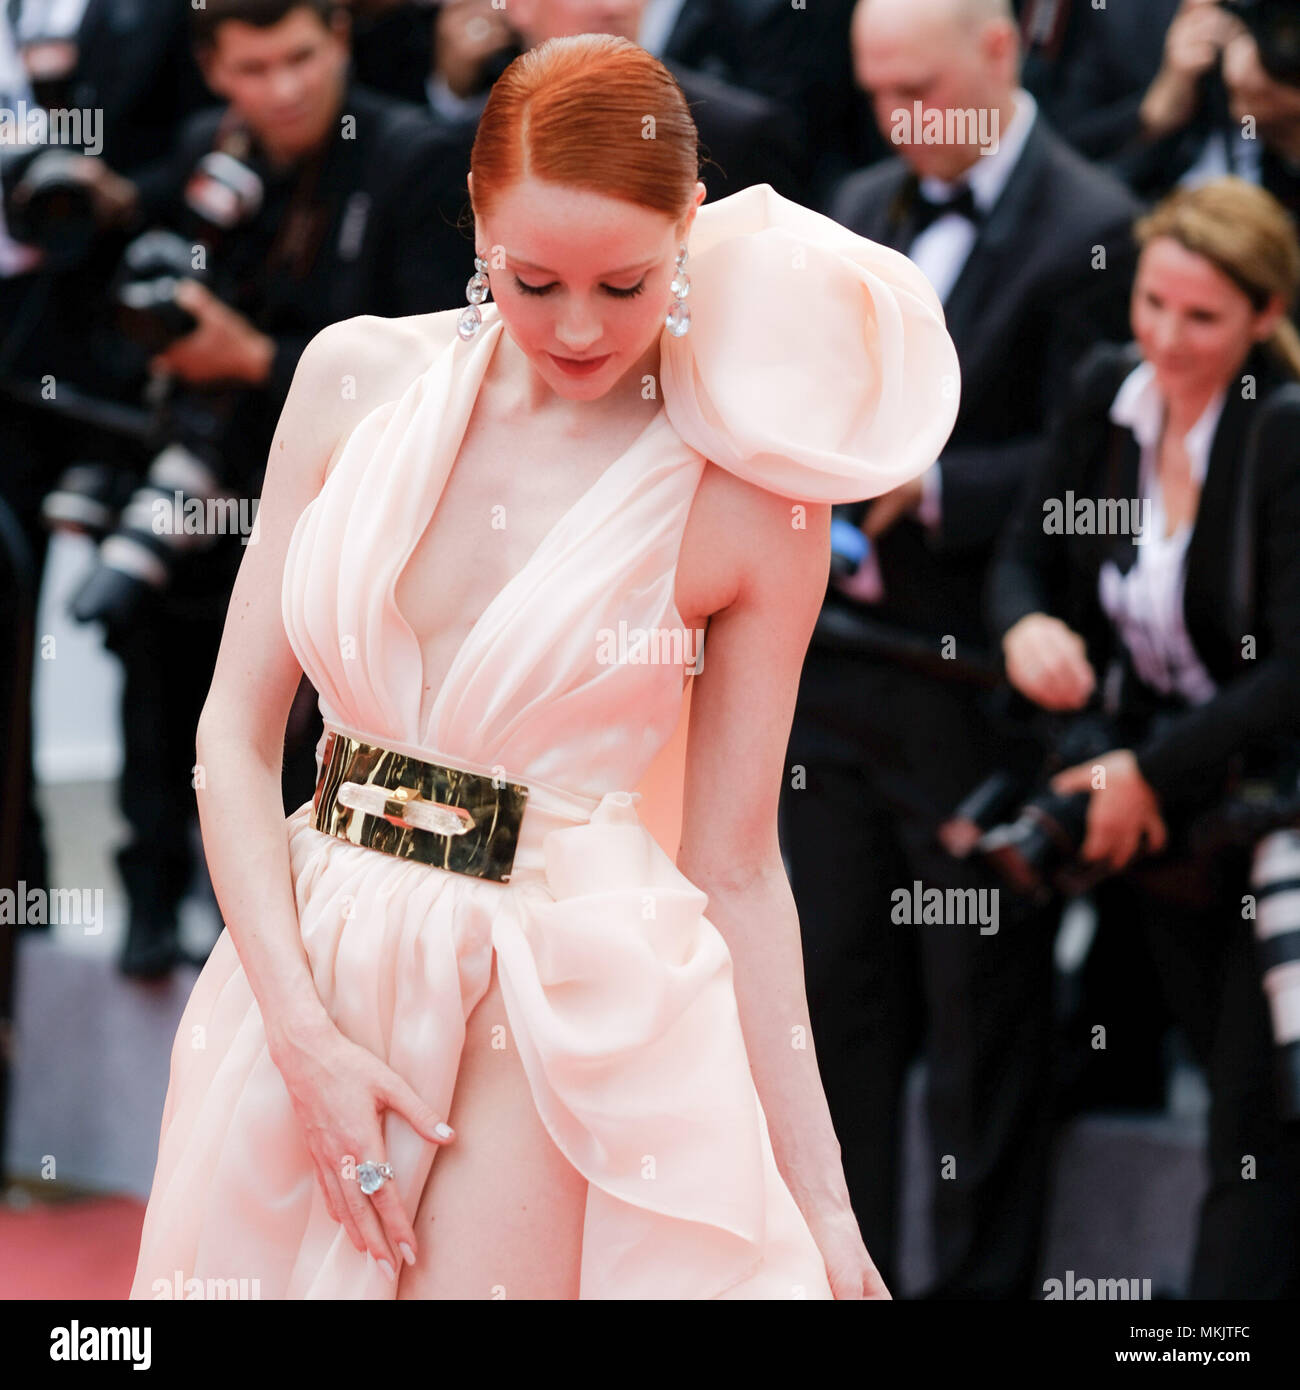 Cannes, France. 8th May, 2018. Barbara Meier at the Opening Ceremony Gala of EVERYBODY KNOWS on Tuesday 8 May 2018 as part of the 71st International Cannes Film Festival held at Palais des Festivals, Cannes. Pictured: Barbara Meier. Picture by Julie Edwards Picture by: Julie Edwards. Credit: Julie Edwards/Alamy Live News Stock Photo